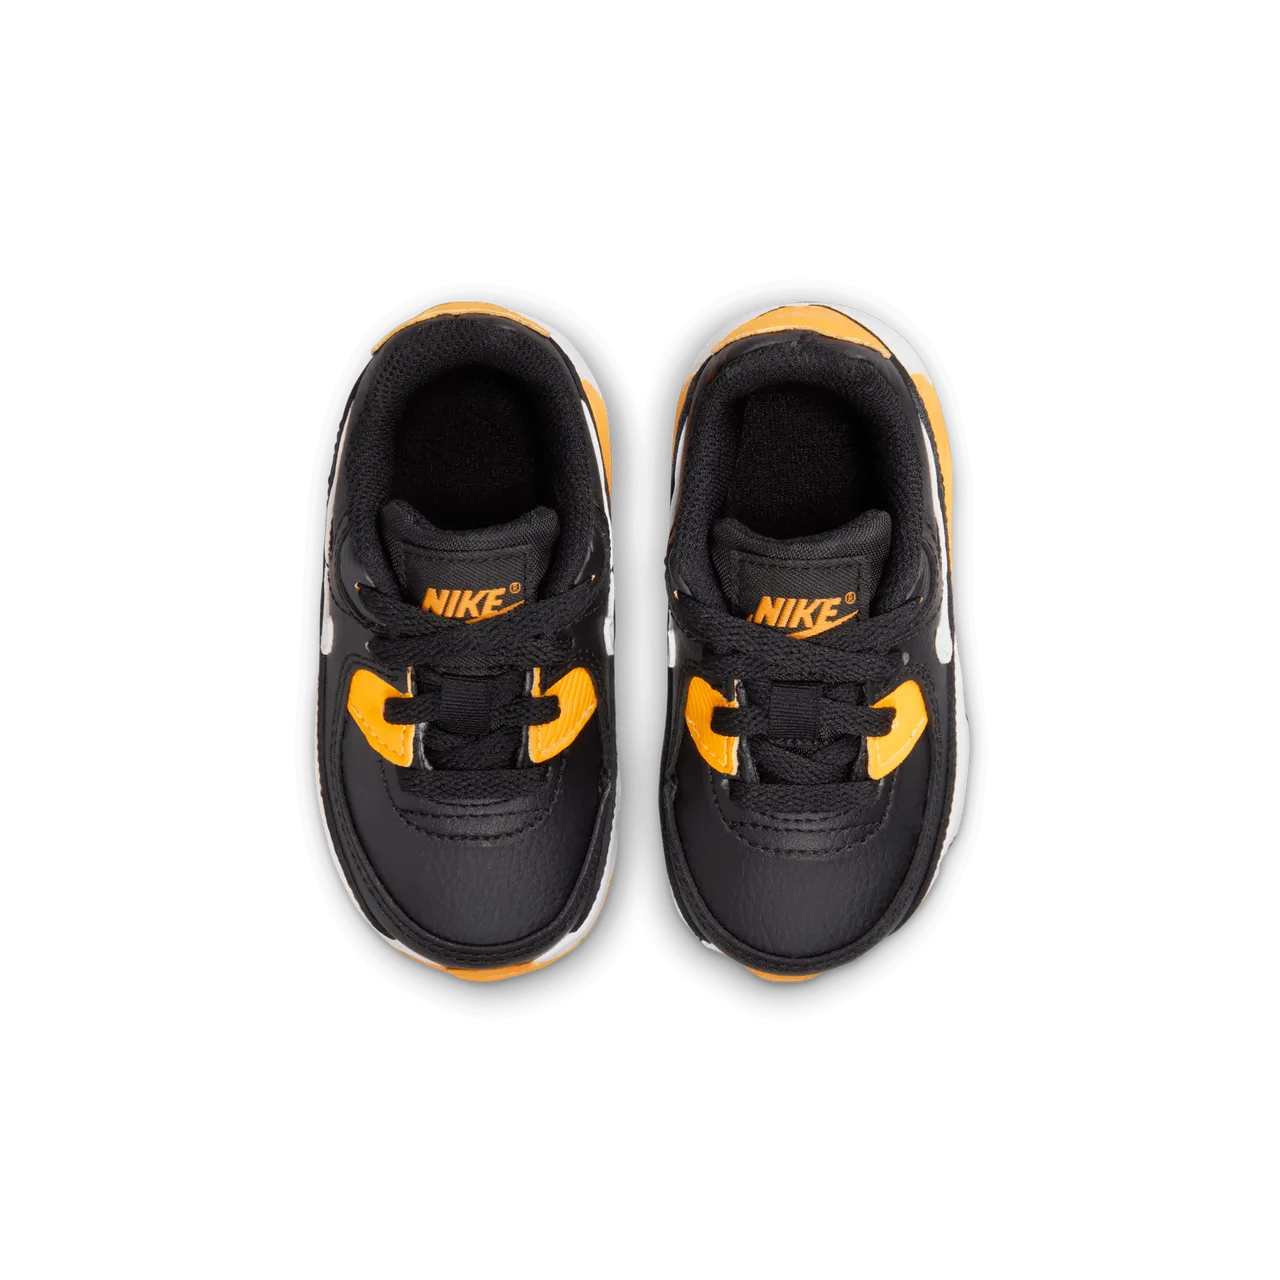 Nike Air Max 90 LTR Baby/Toddler Shoes - Black